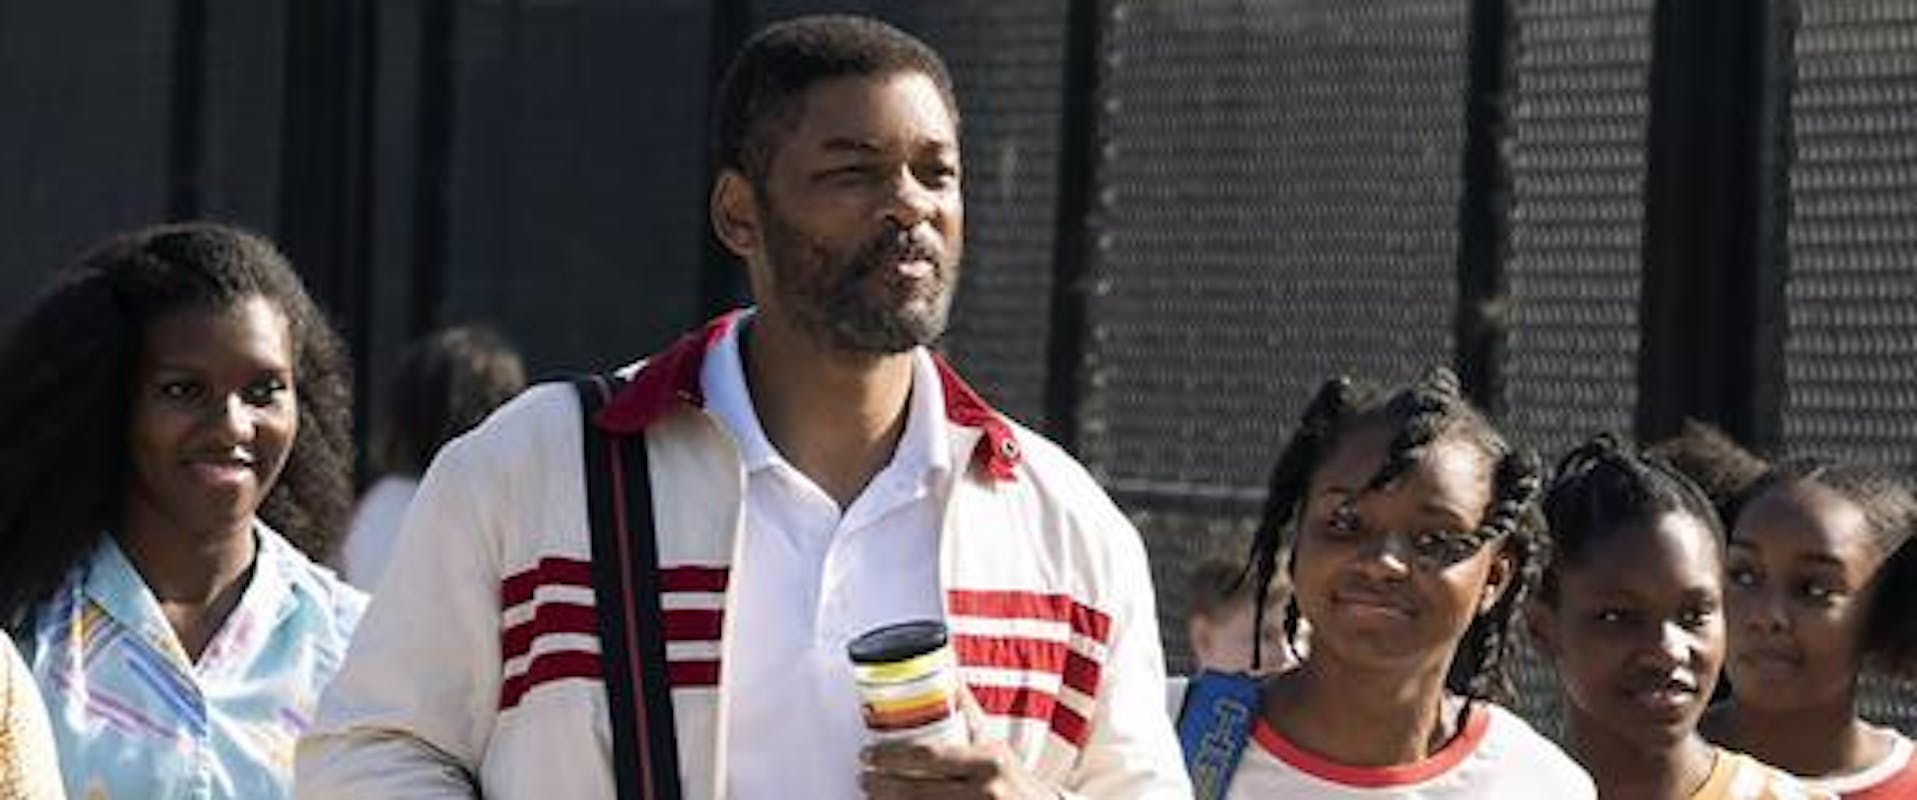 Will Smith in a still from the biopic 'King Richard'